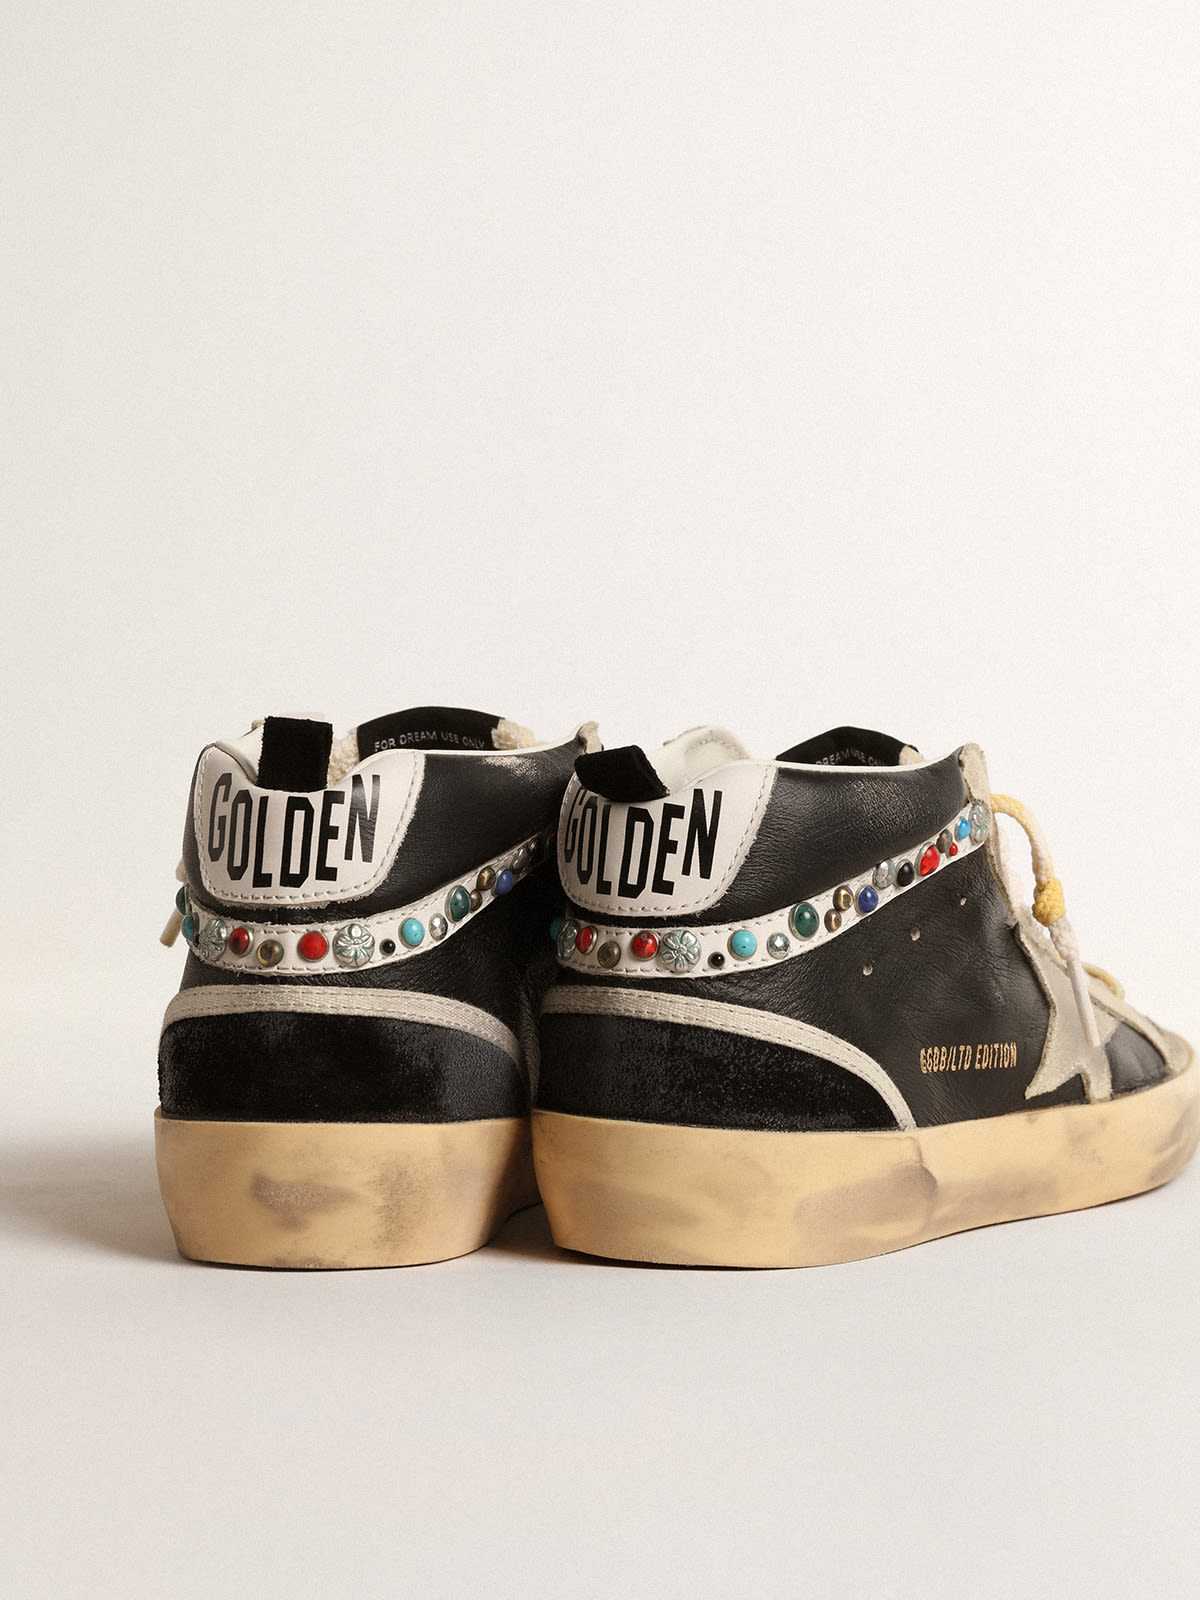 Golden Goose - Mid Star LTD in nappa leather with suede star and studded flash in 